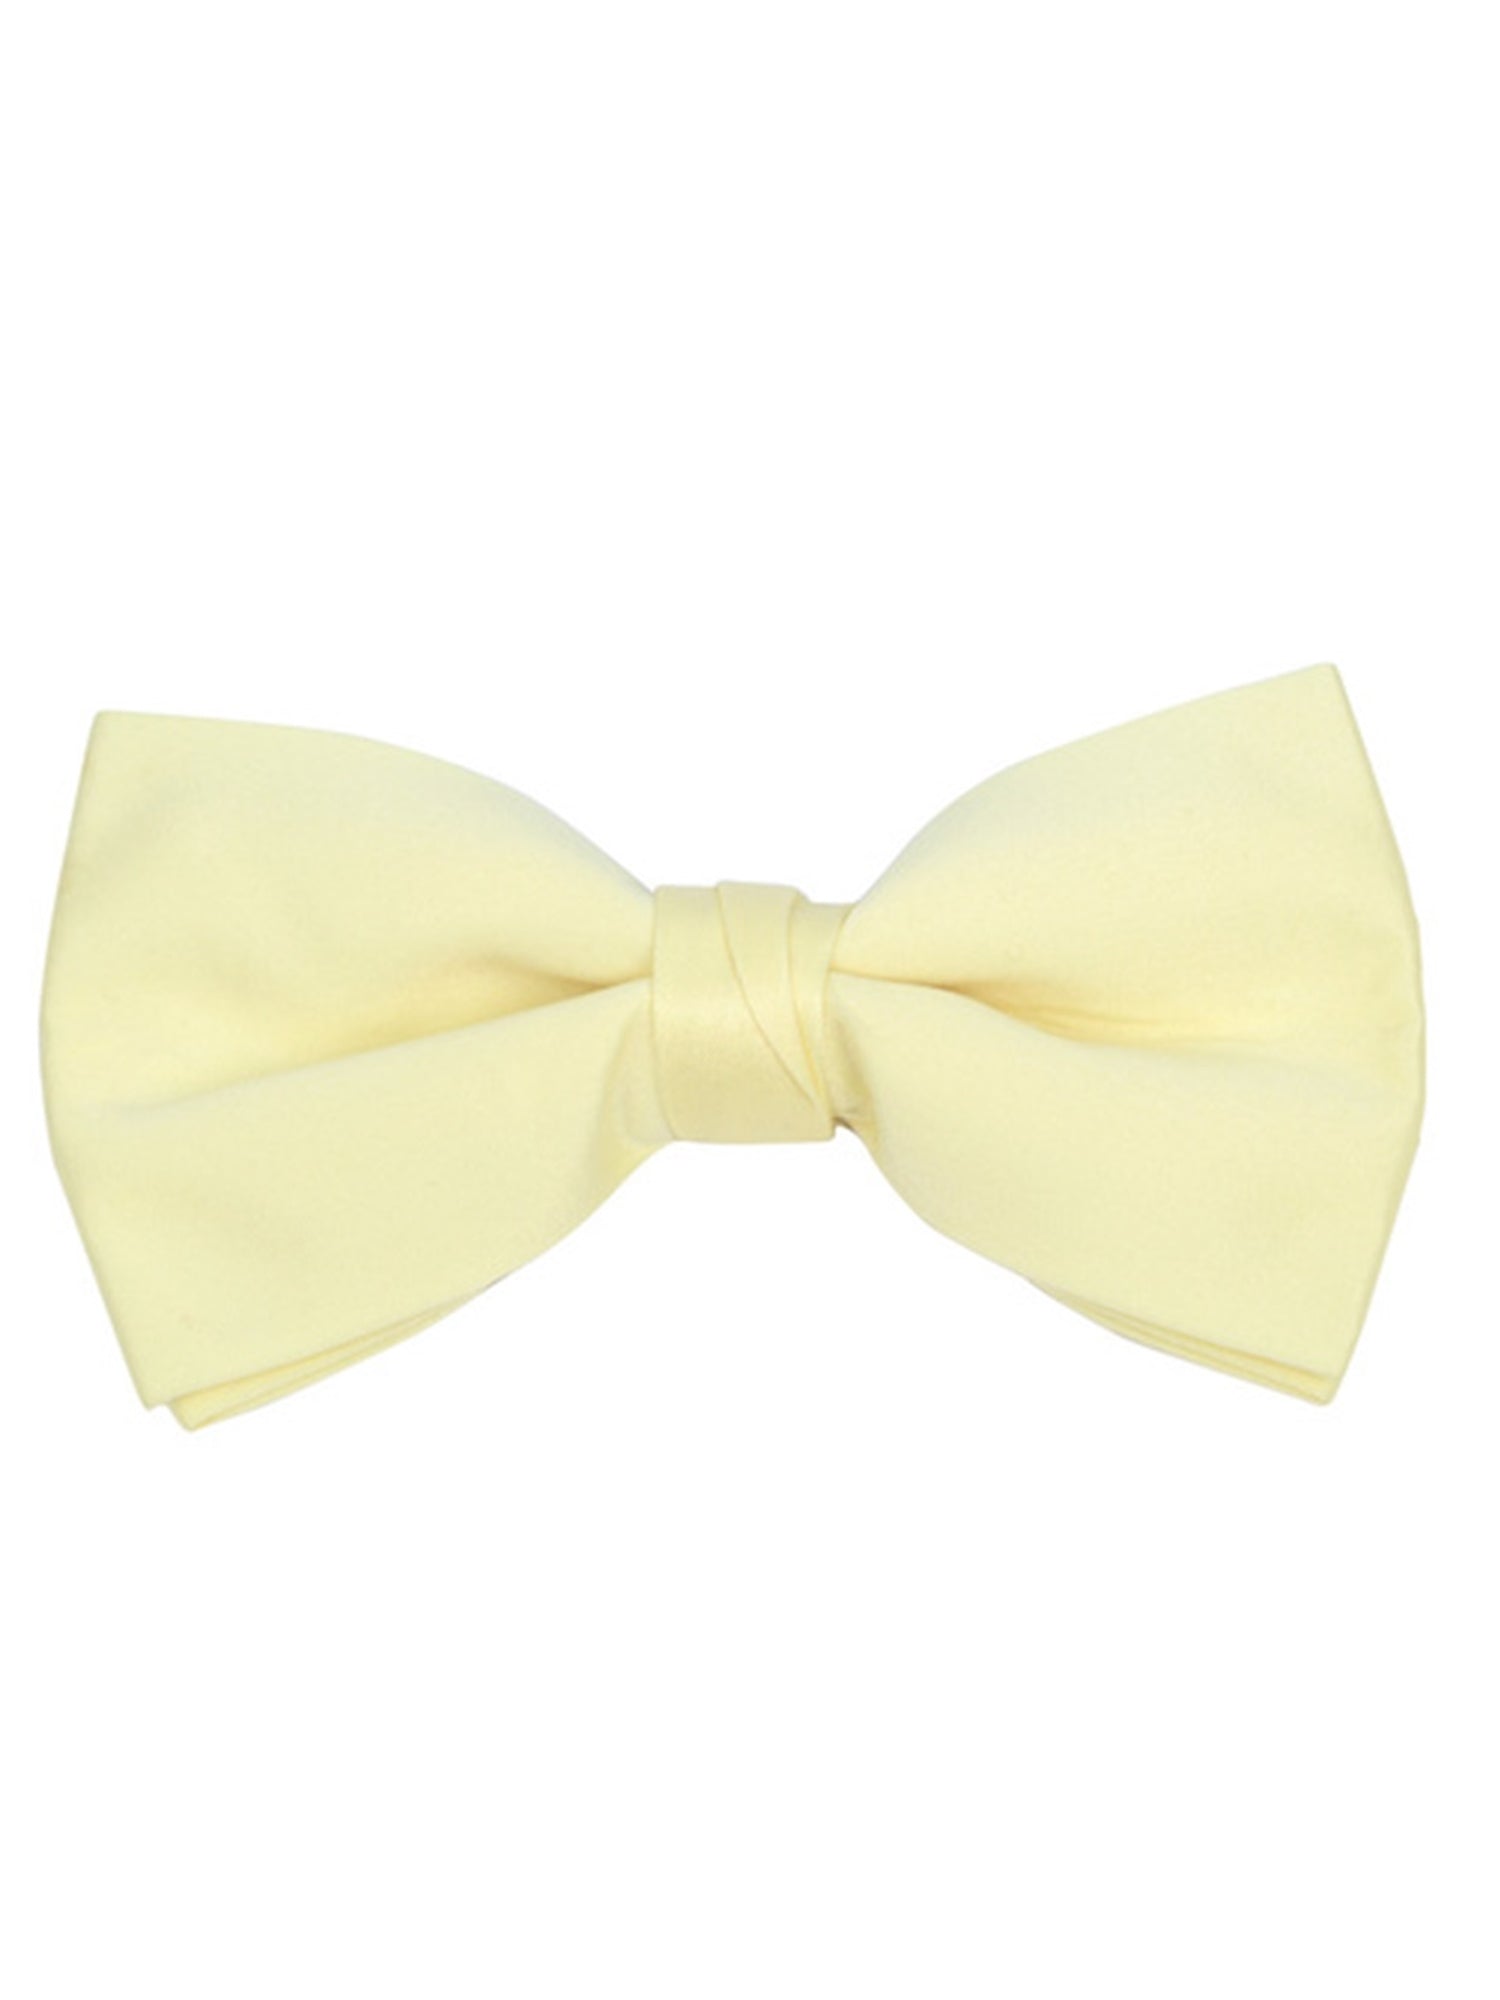 Men's Pre-tied Clip On Bow Tie - Formal Tuxedo Solid Color Men's Solid Color Bow Tie TheDapperTie Light Yellow One Size 